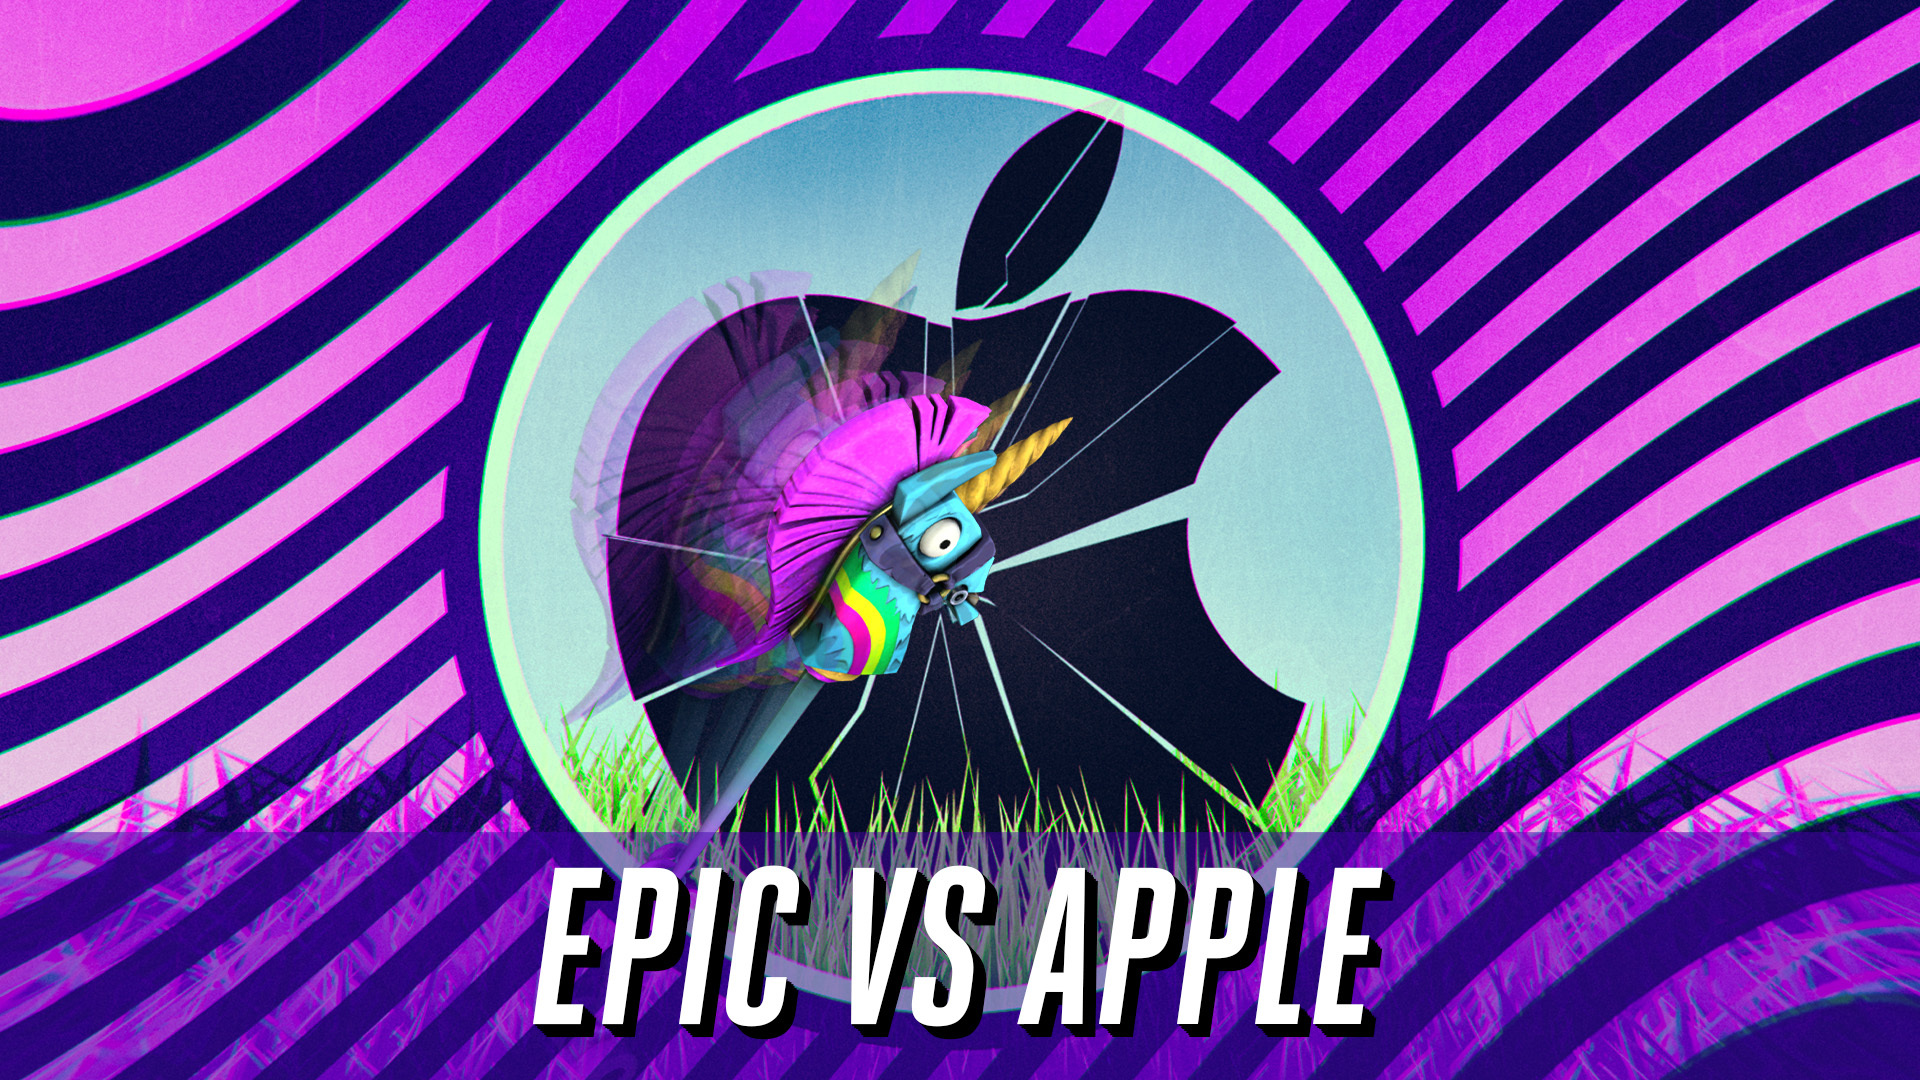 Apple says Epic Games demands threaten iOS app security, privacy, quality